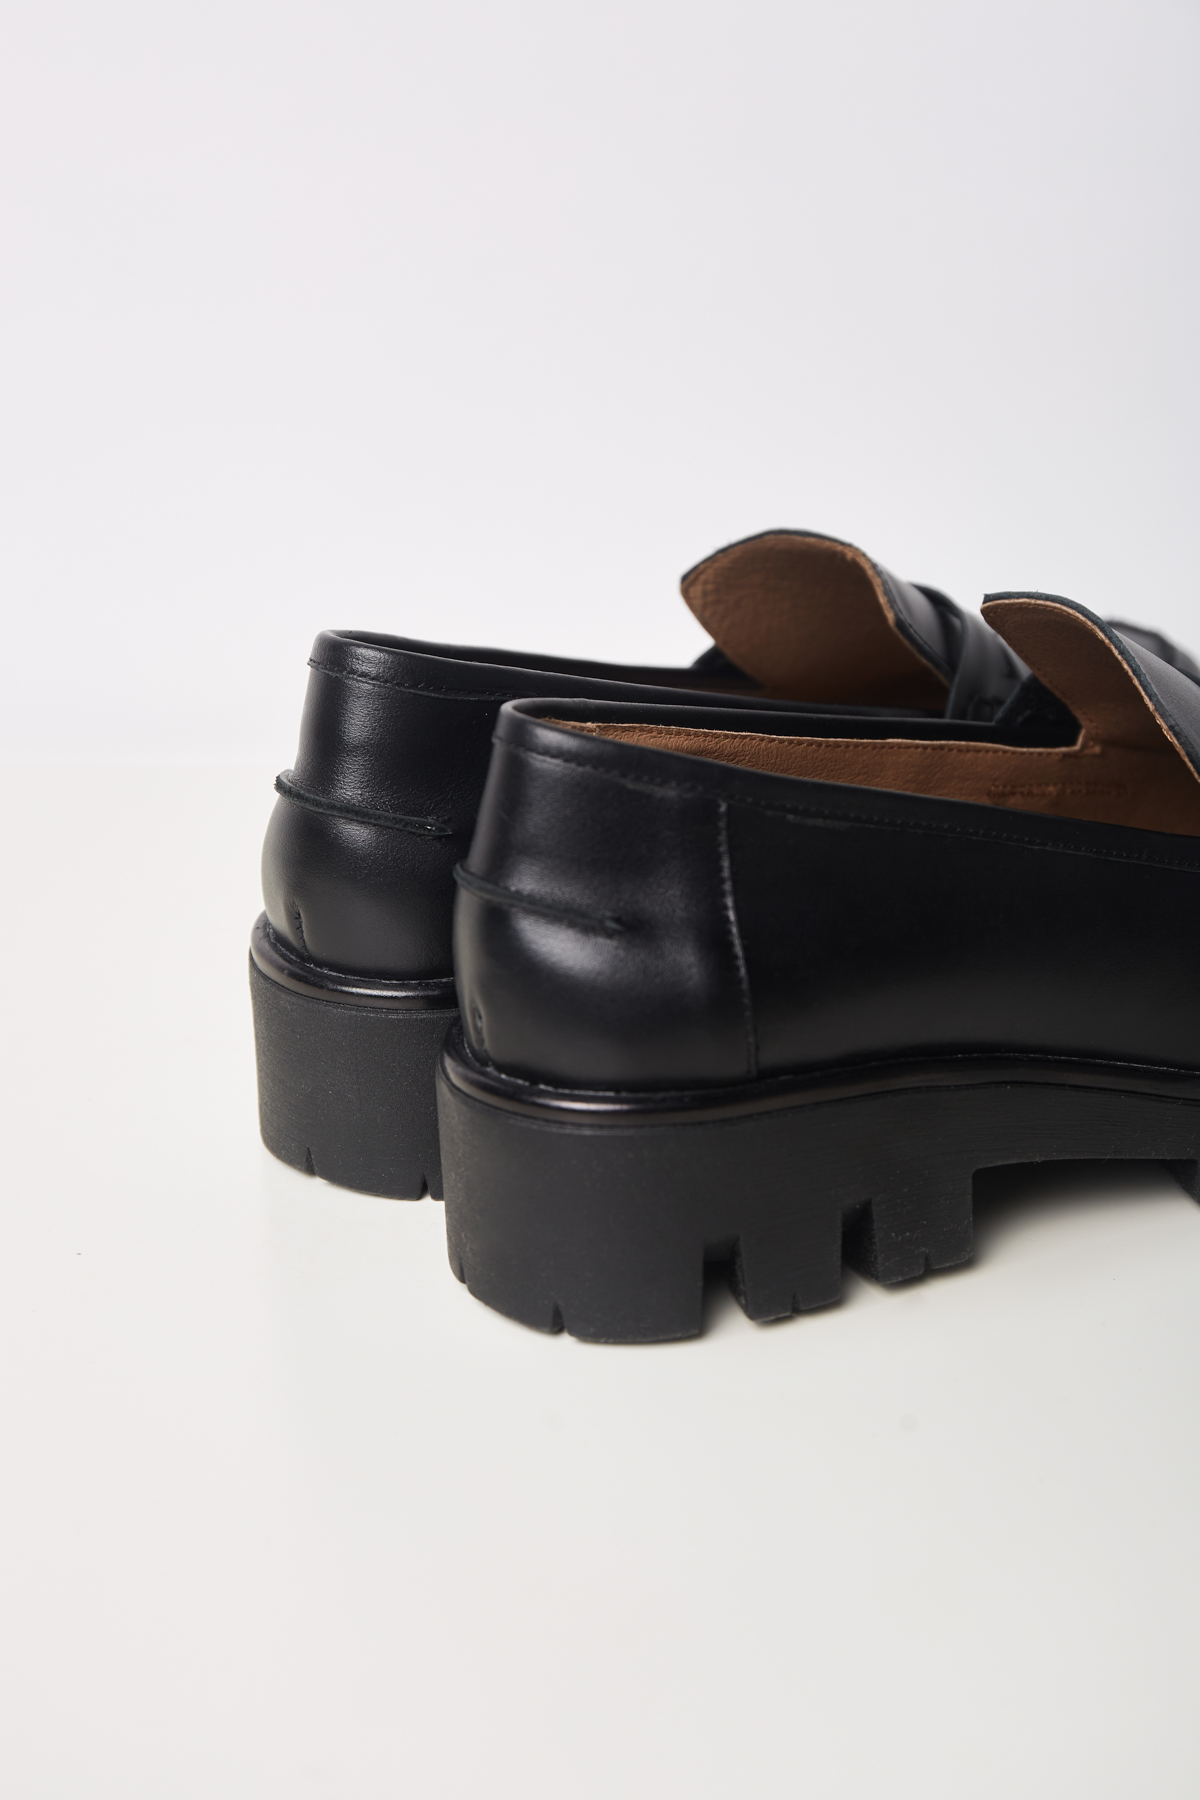 Black genuine leather loafers, photo 5